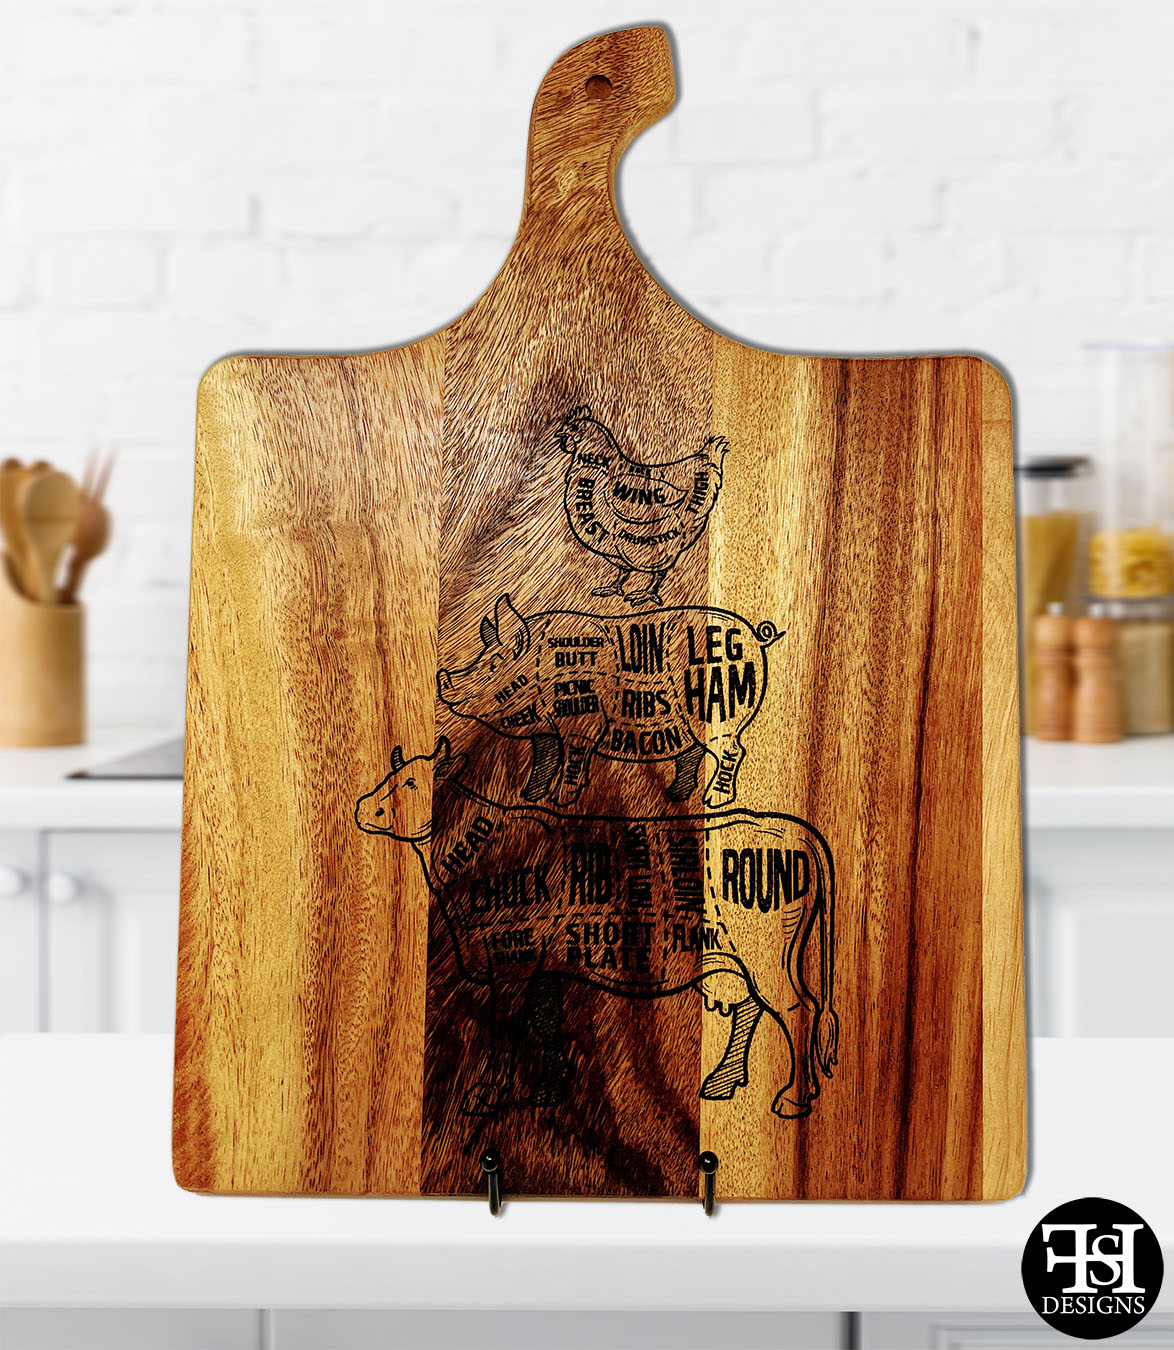 Cuts of Meats Outlined Large Curved Handle Acacia Wood Cutting Board - FHS  Designs - Custom Woodworking. CNC and Laser Engraving